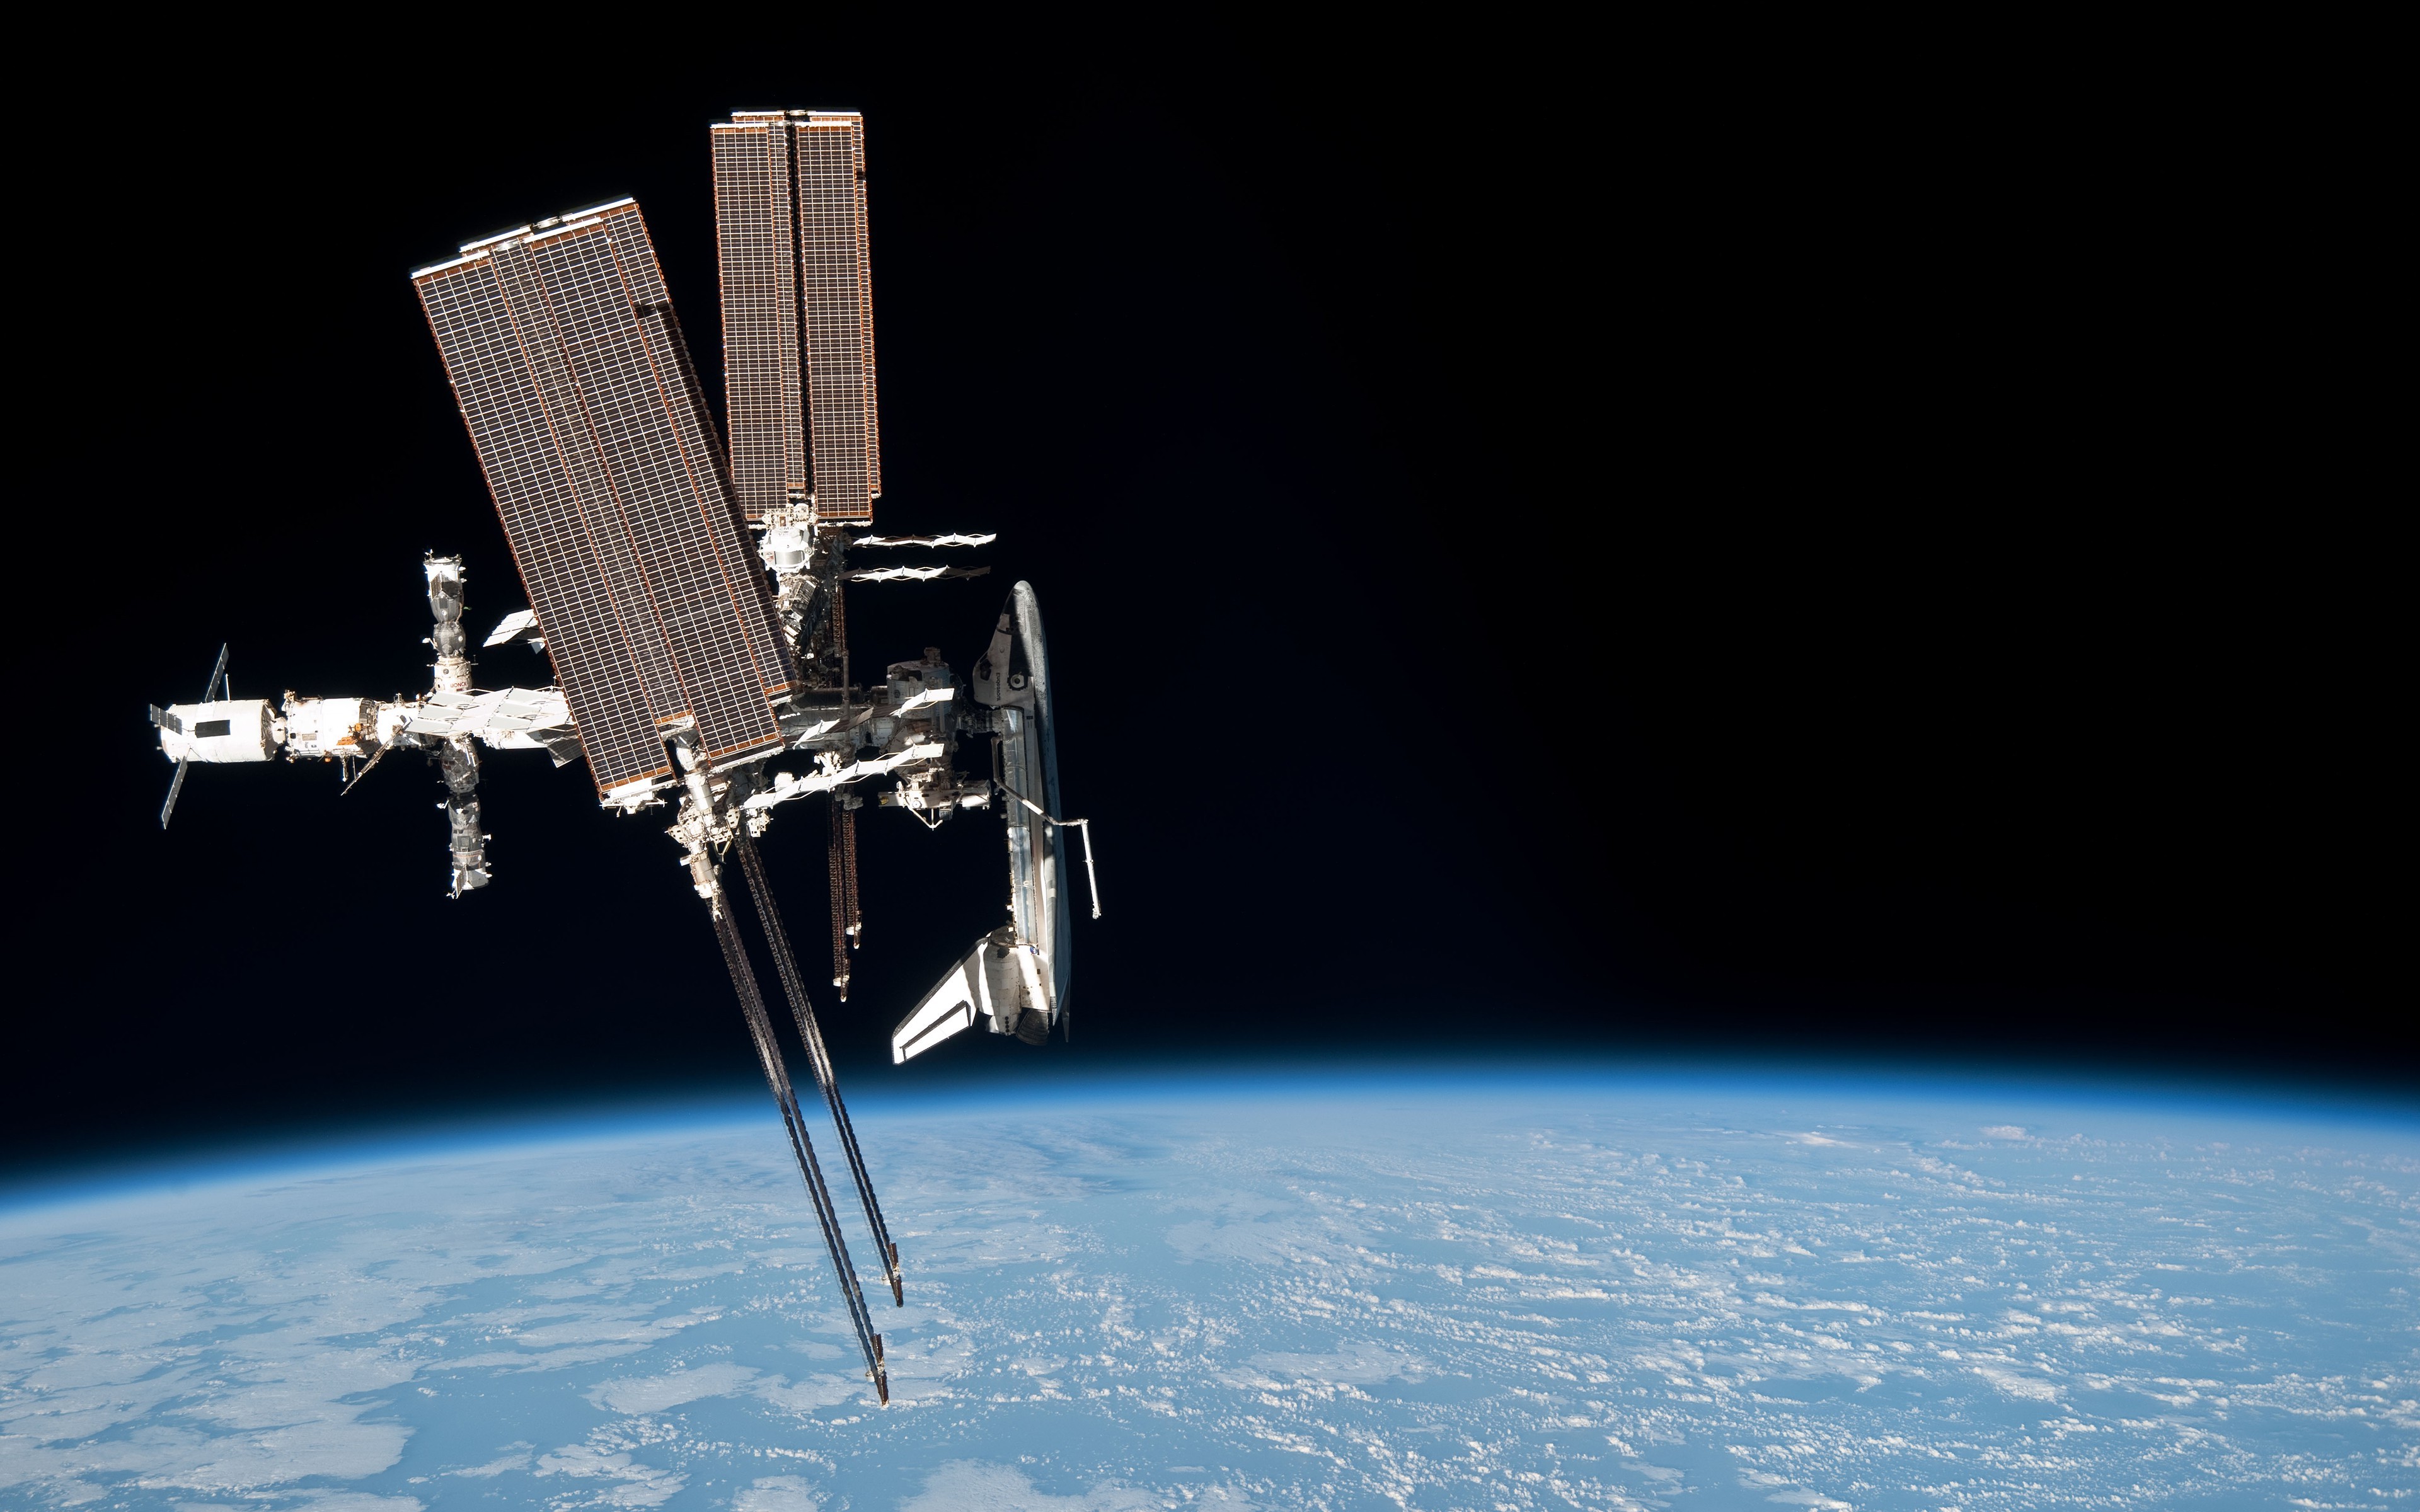 International Space Station Iss Shuttle Endeavour